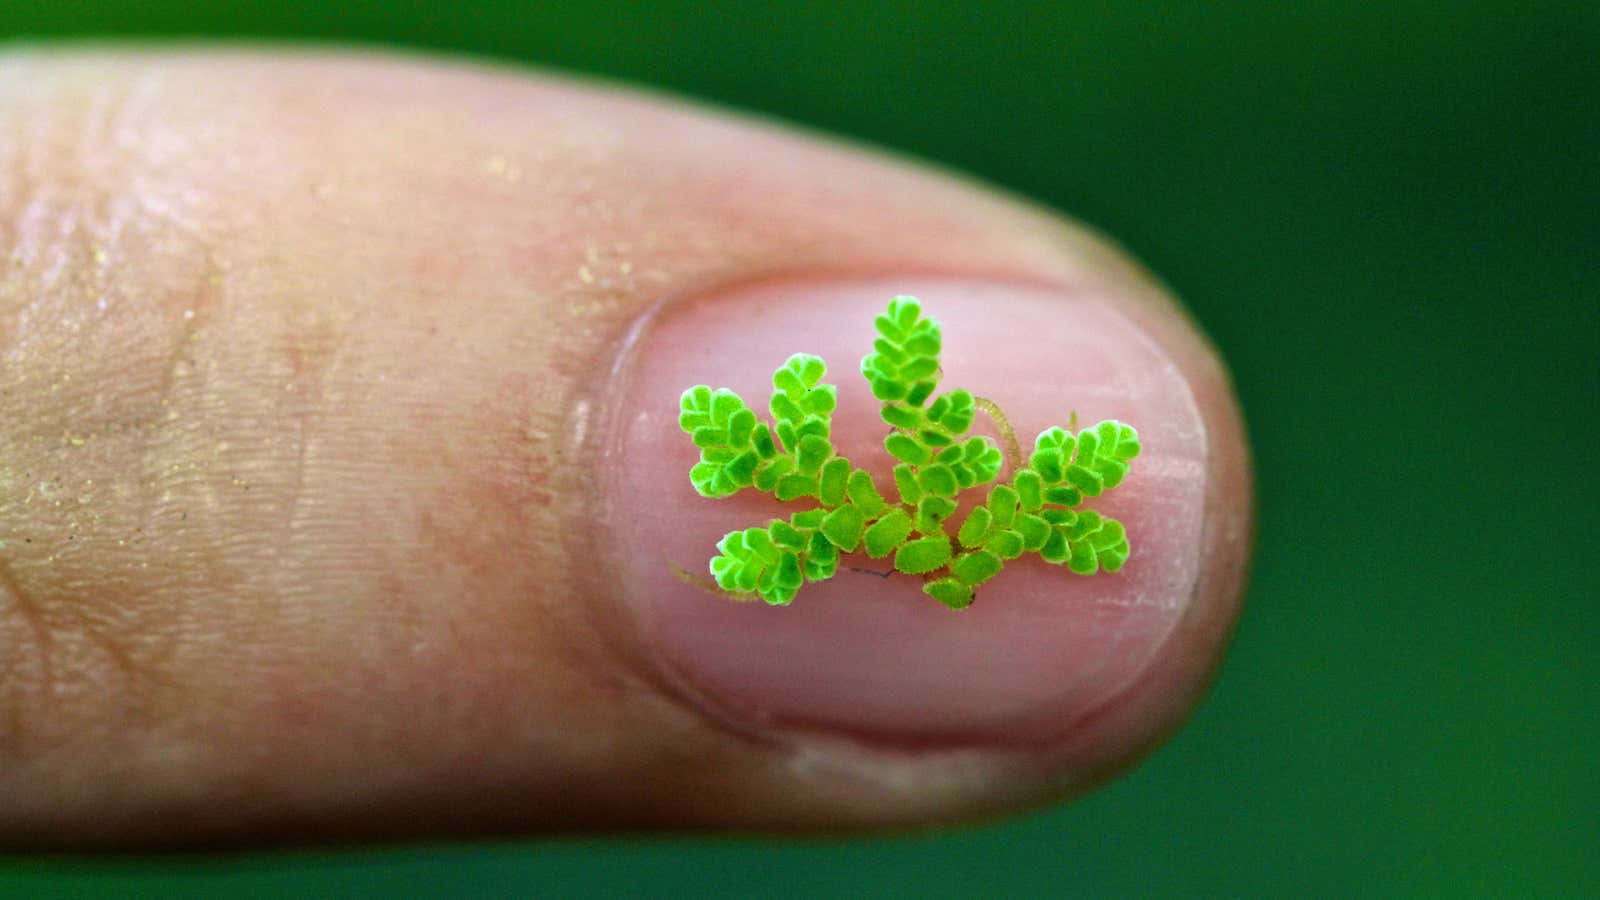 The Azolla fern: tiny but mighty.